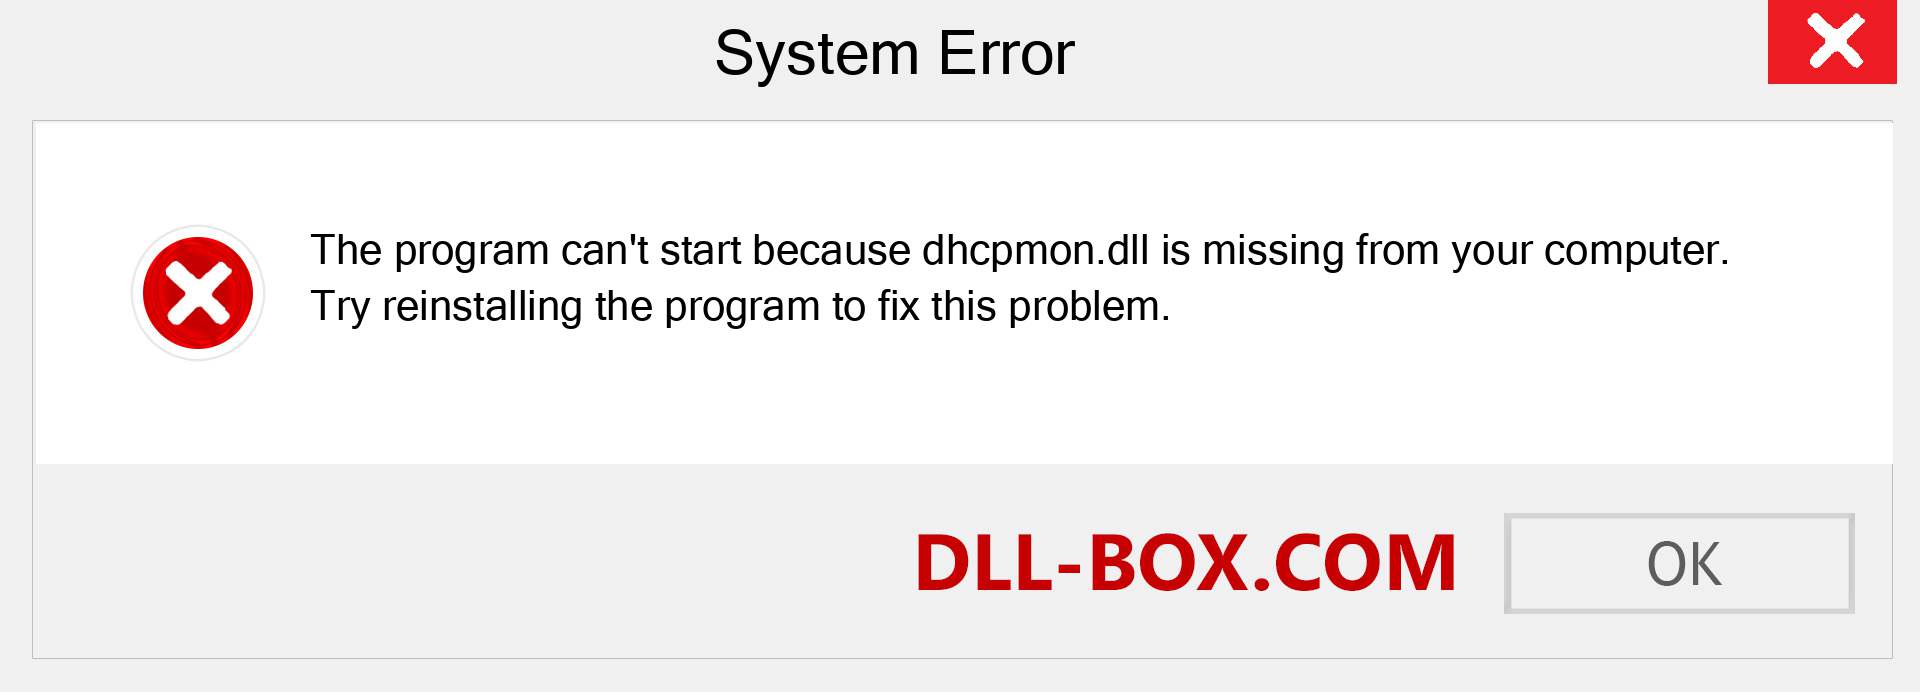  dhcpmon.dll file is missing?. Download for Windows 7, 8, 10 - Fix  dhcpmon dll Missing Error on Windows, photos, images